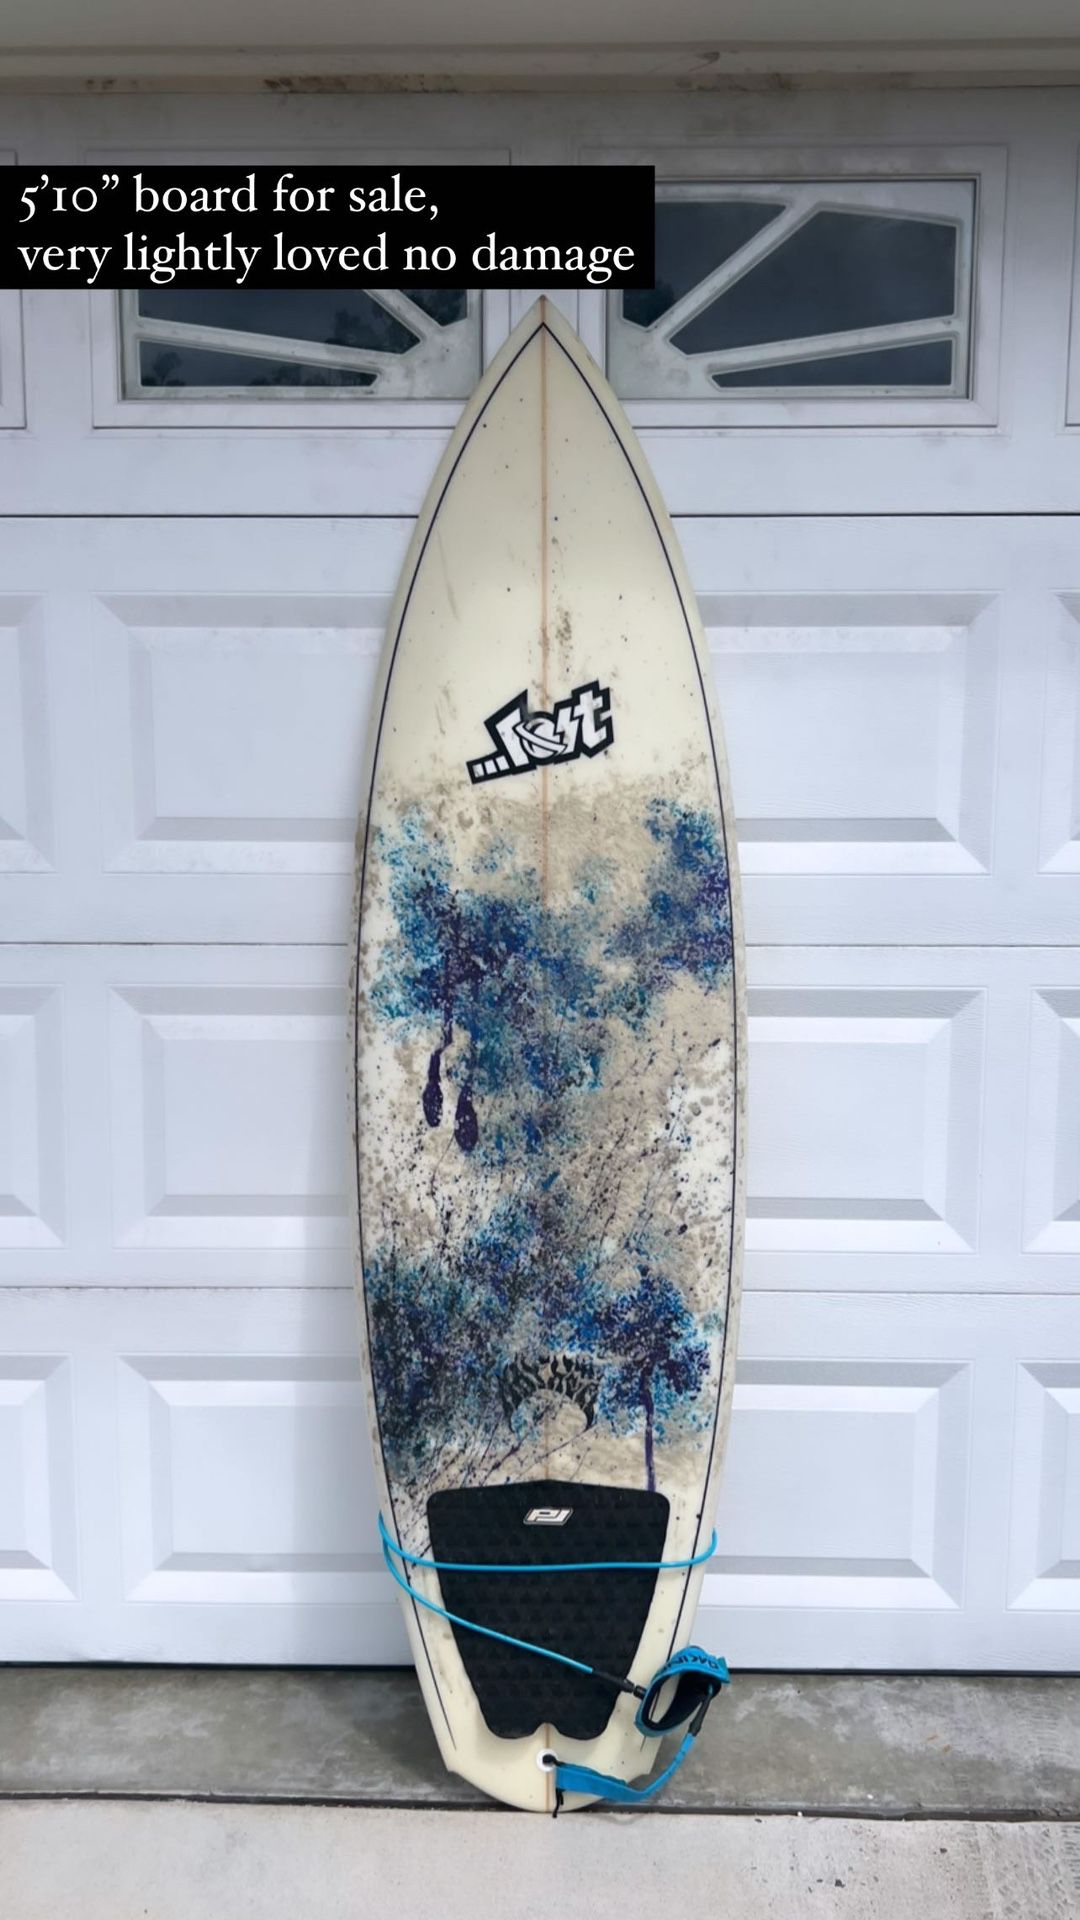 6” Surfboard, Barely Used